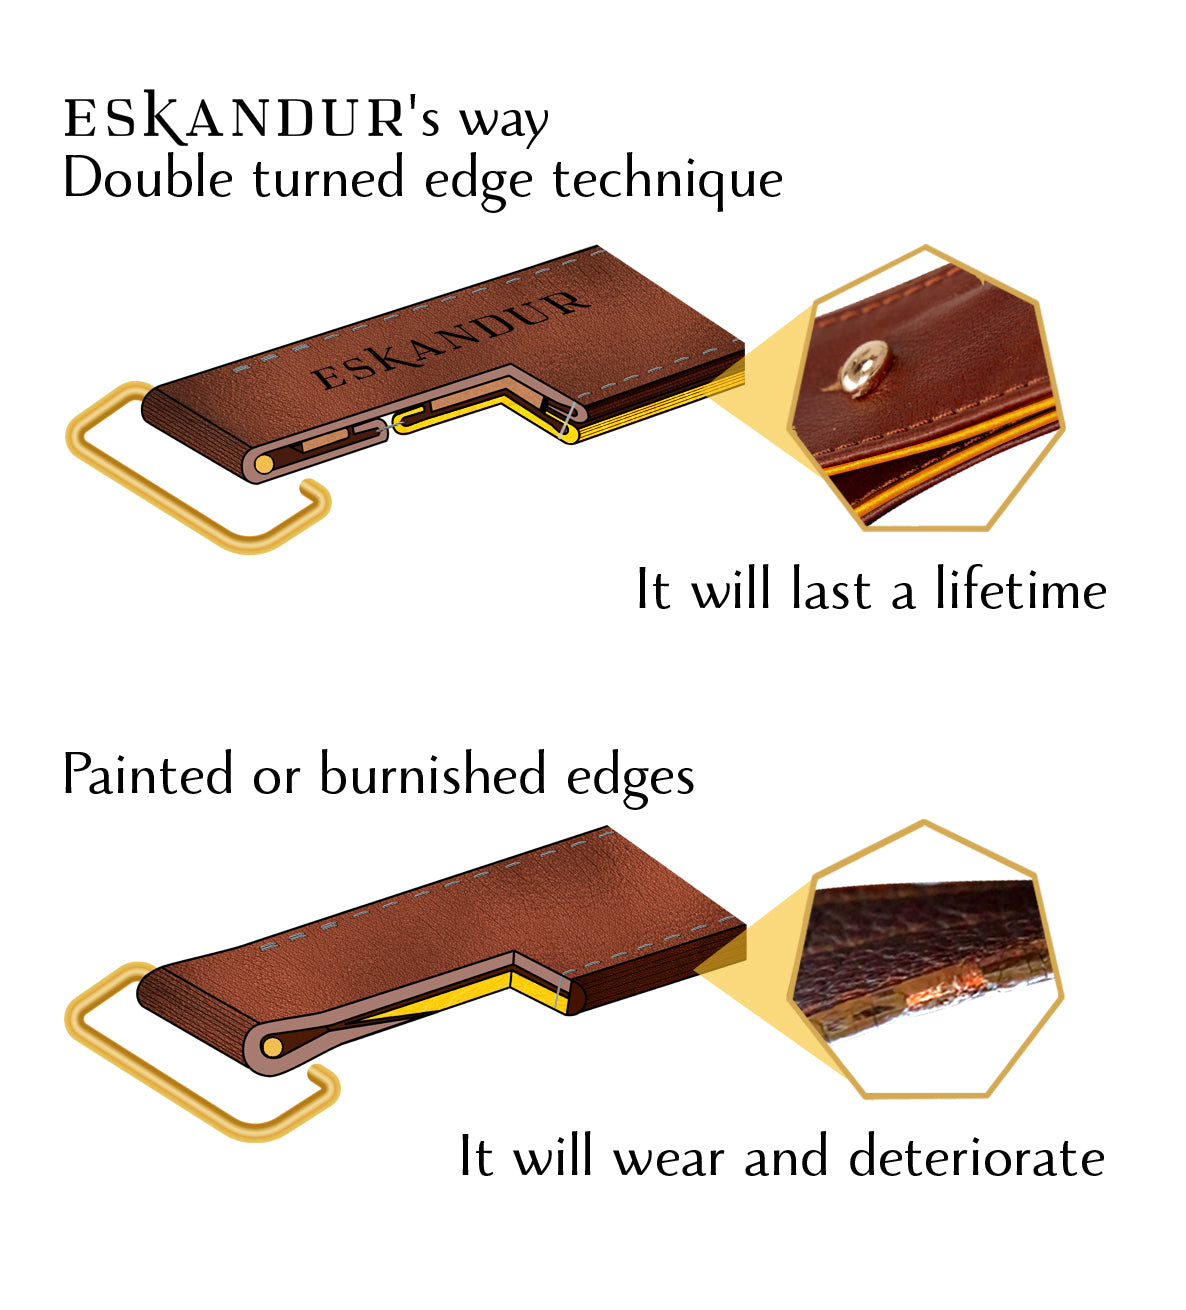 comparaison of the double turned edges technique and painted or burnished edges on double sided leather straps